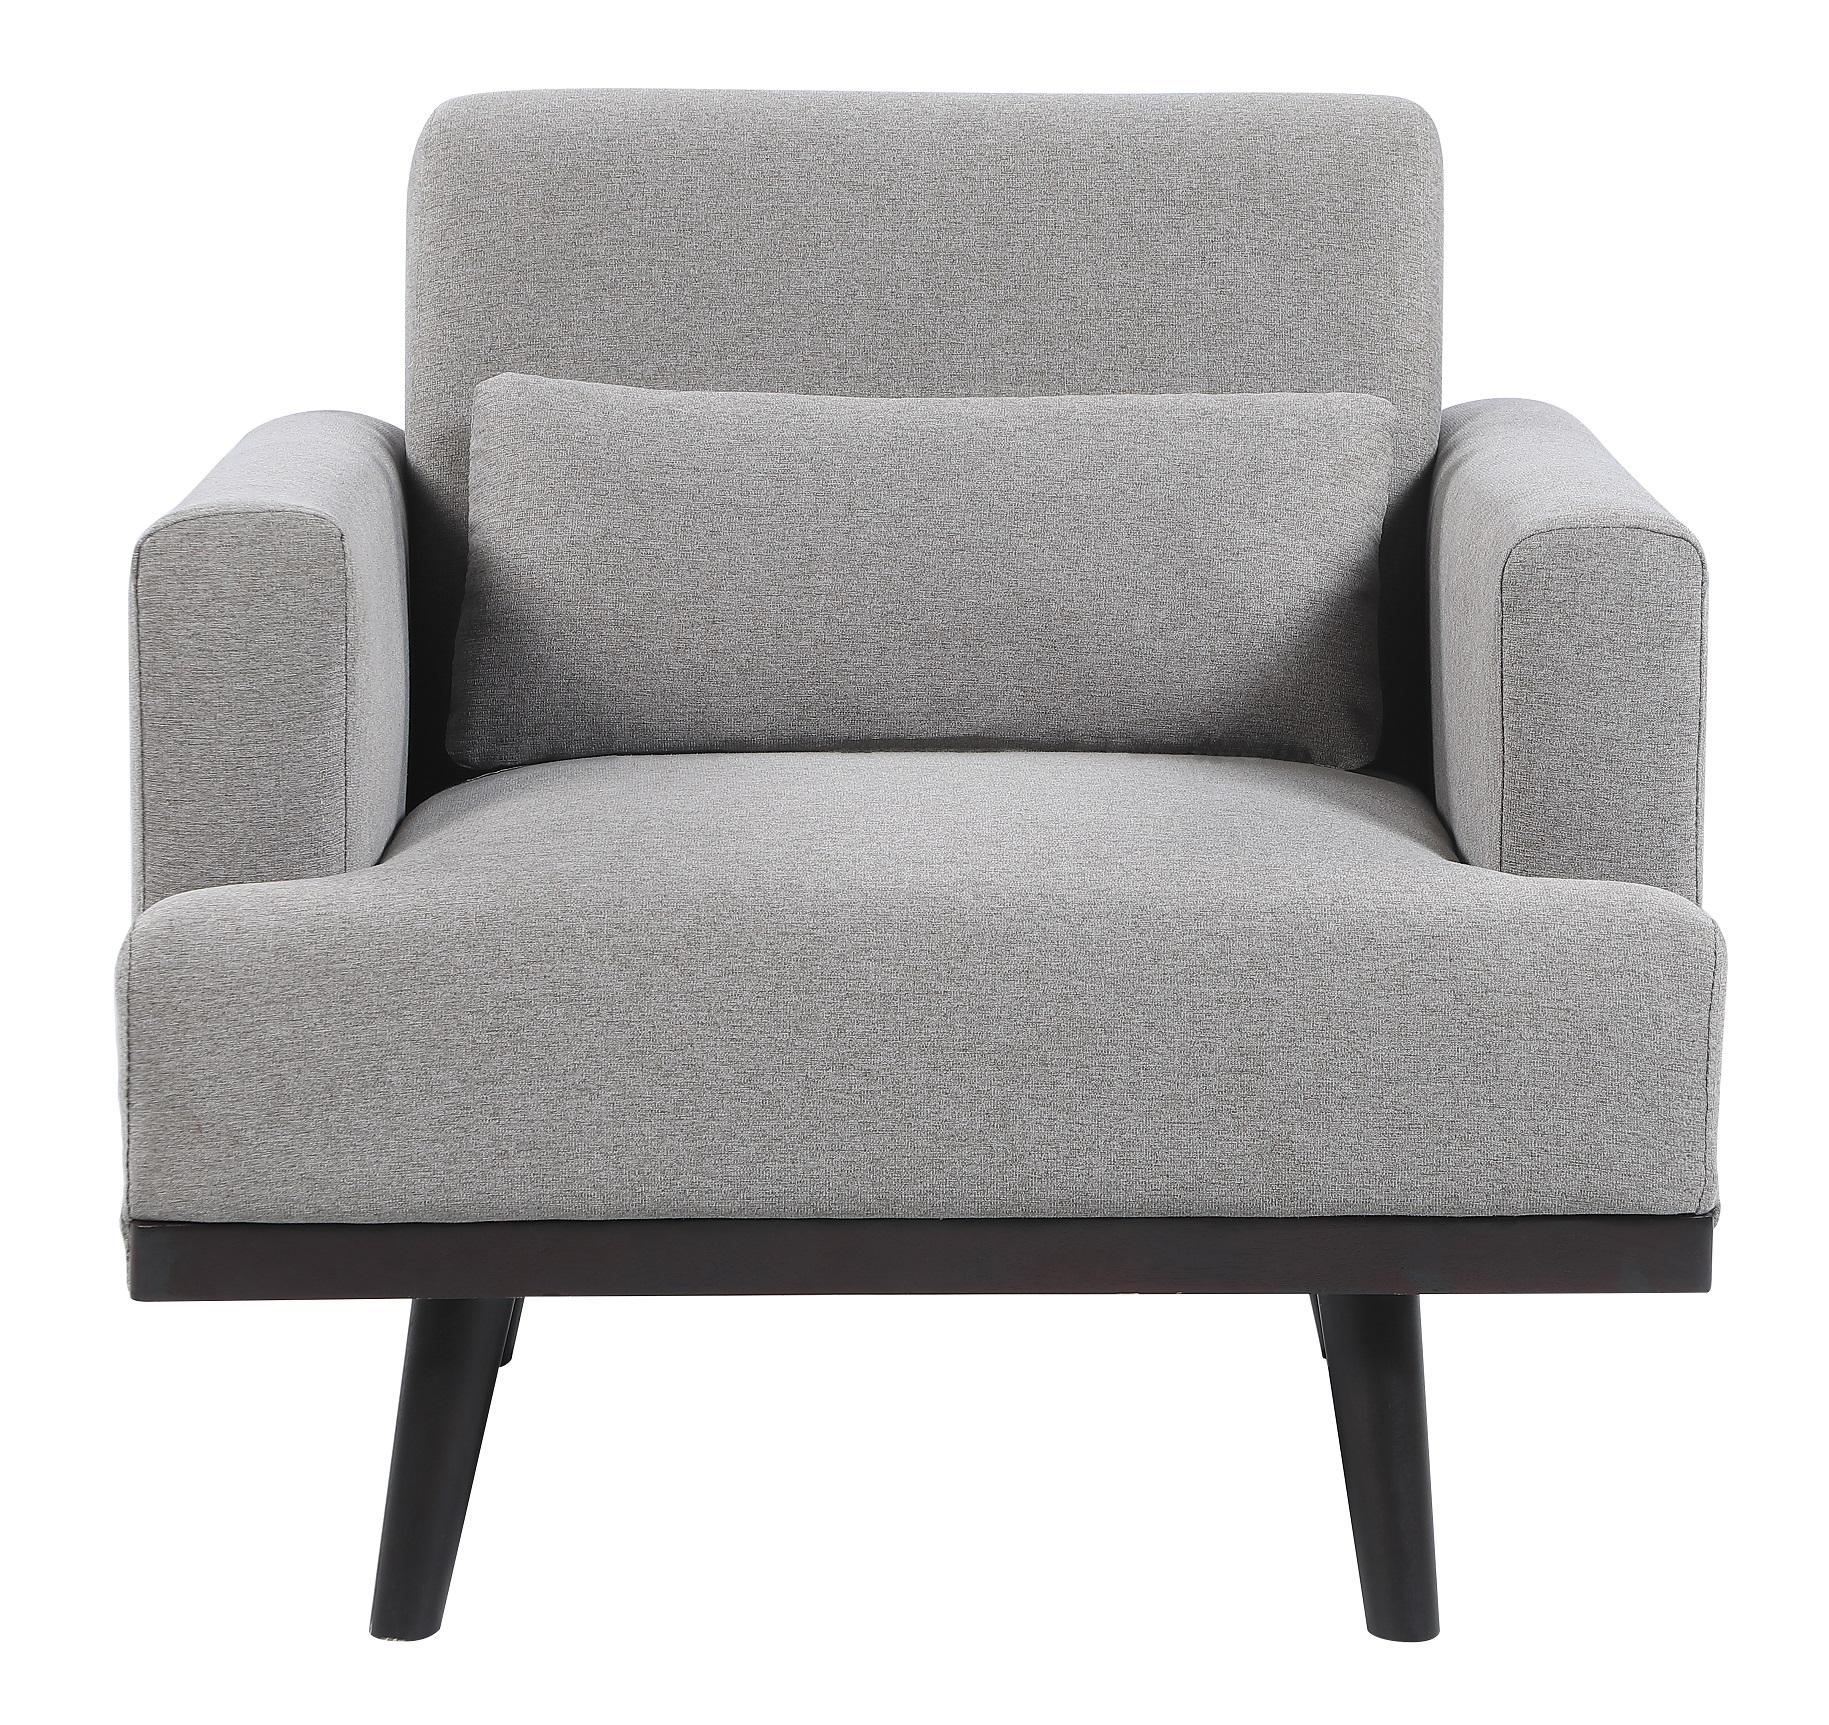 Contemporary Arm Chair 511123 Blake 511123 in Gray 